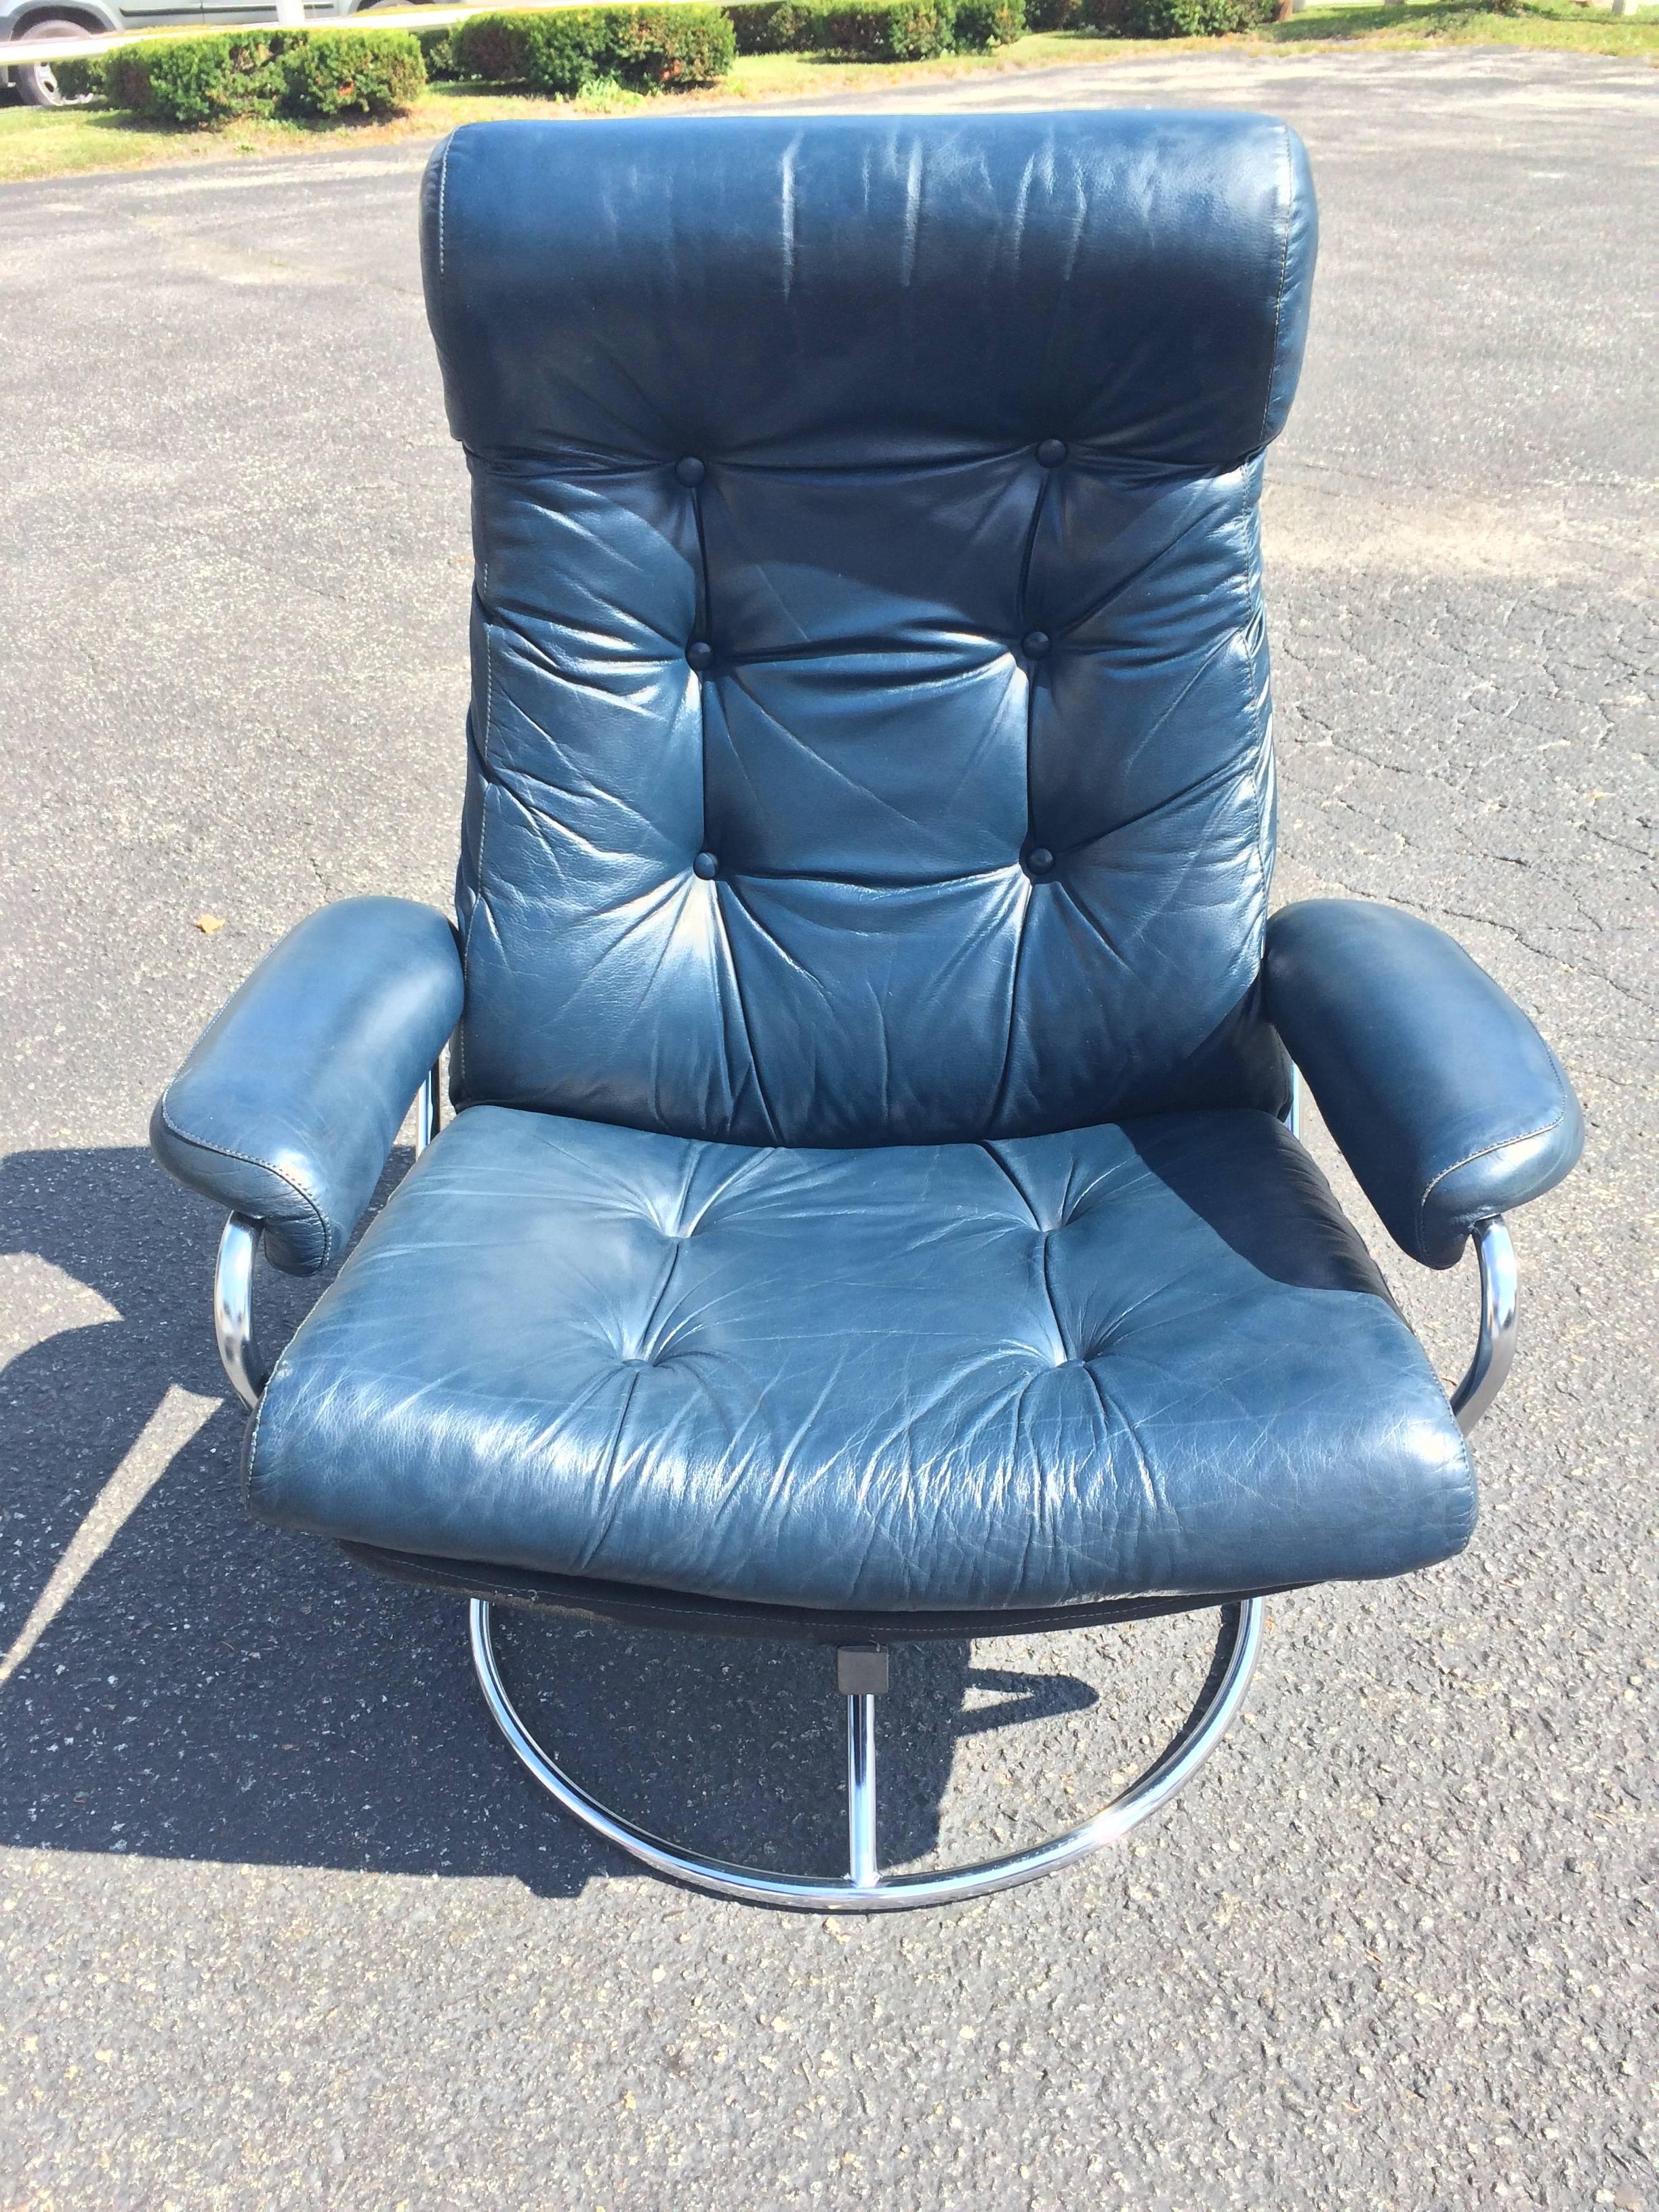 Mid-20th Century  Leather Recliner Lounge Chair and Ottoman in Blue